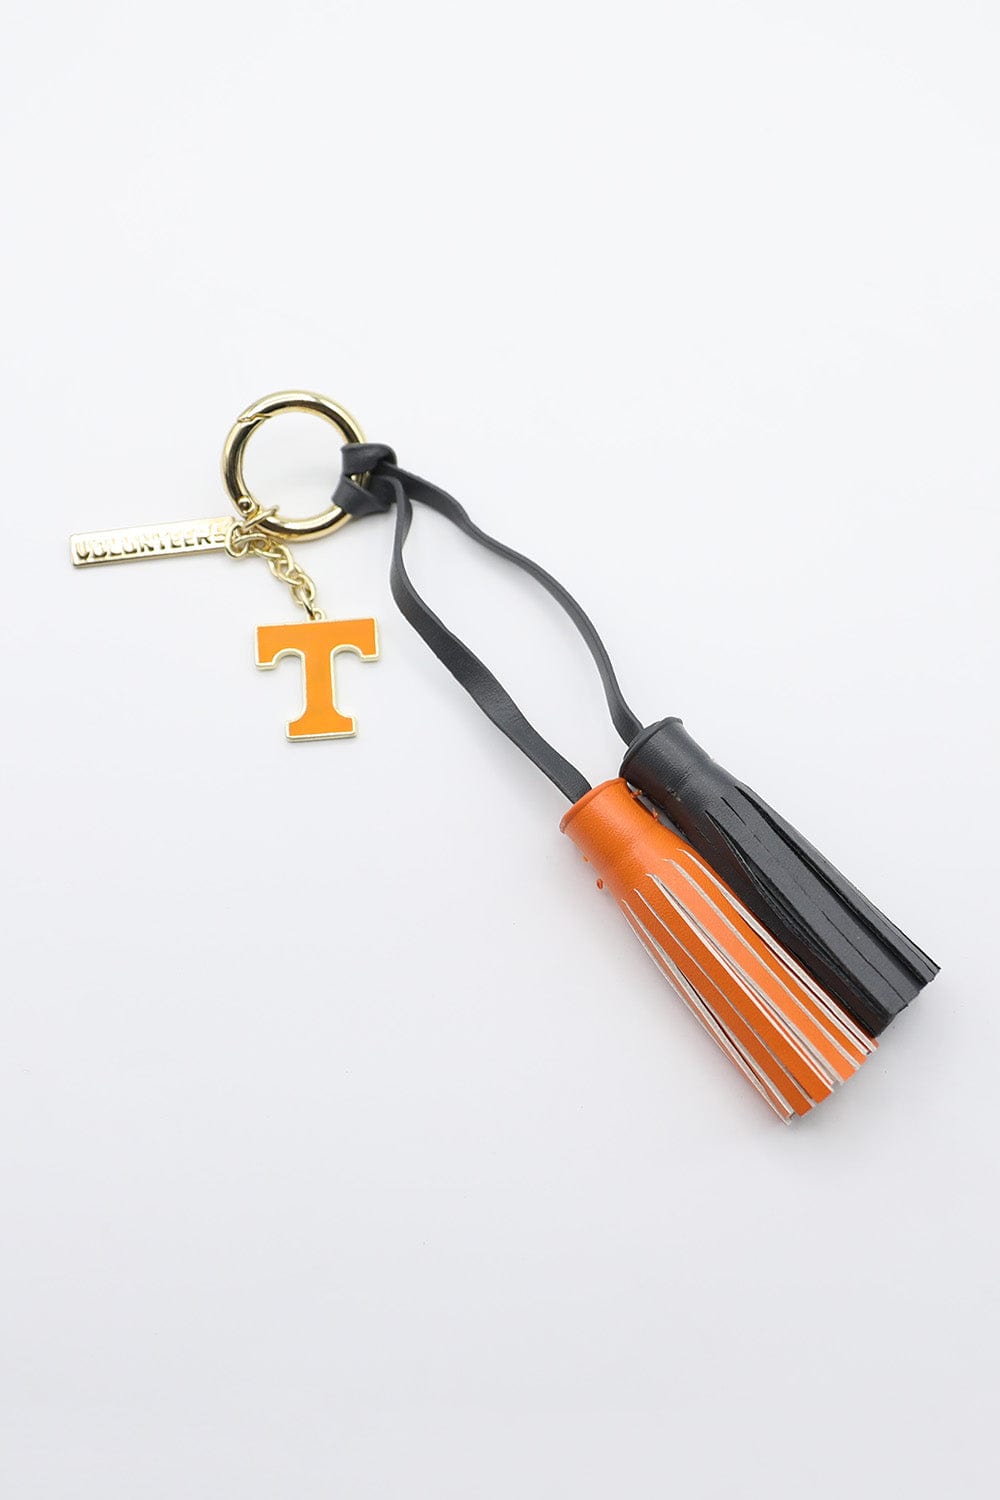 Keychain with Orange and Navy Tassels and Orange "T" and "VOLUNTEERS" Charm